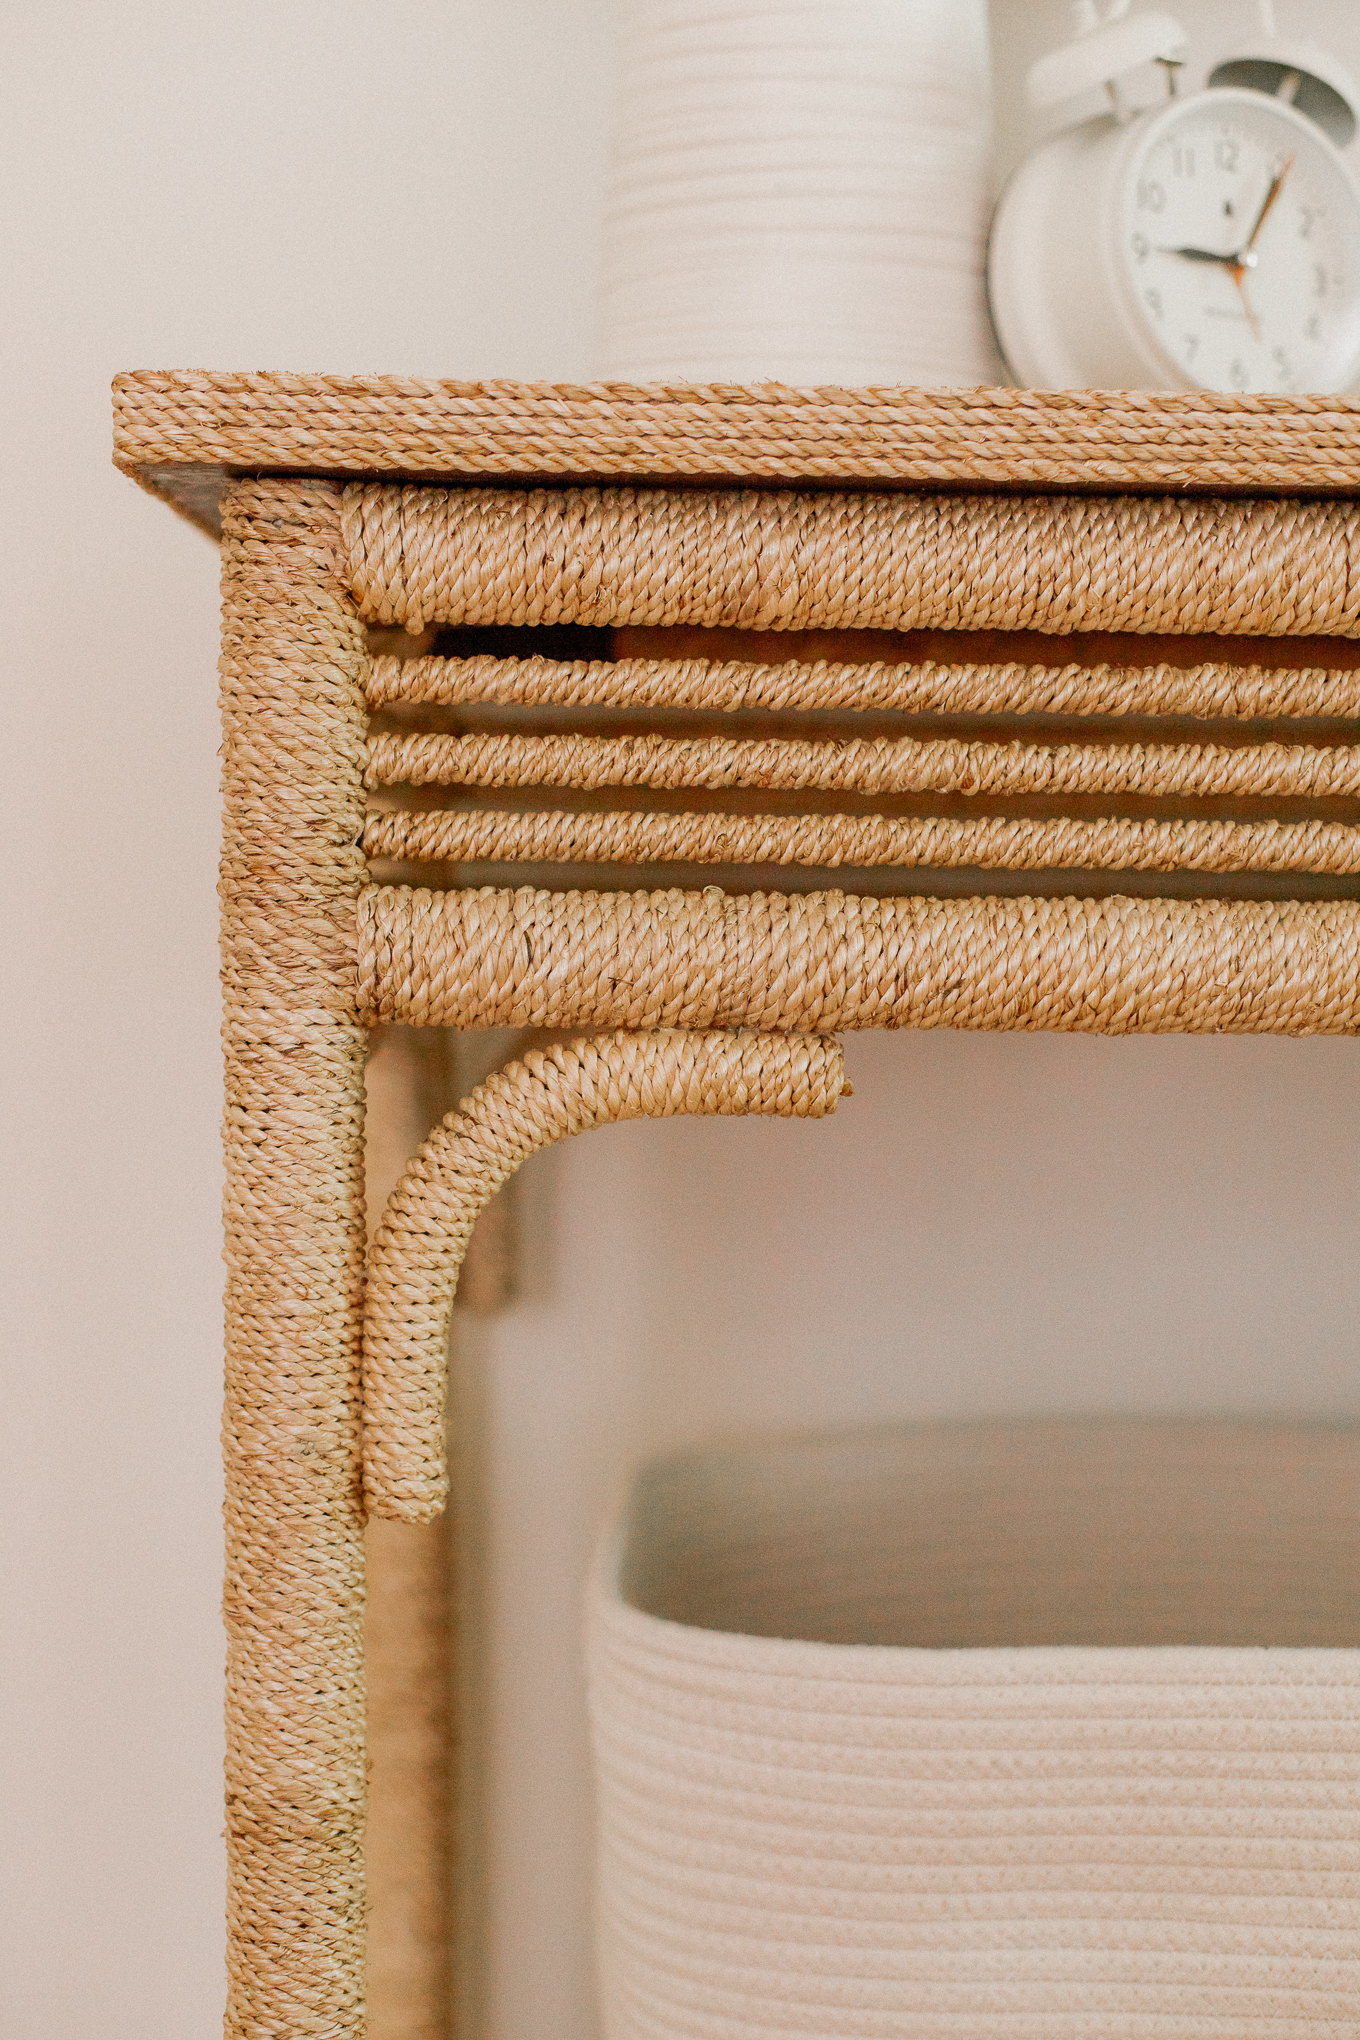 Braided Rope Console Table | Louella Reese